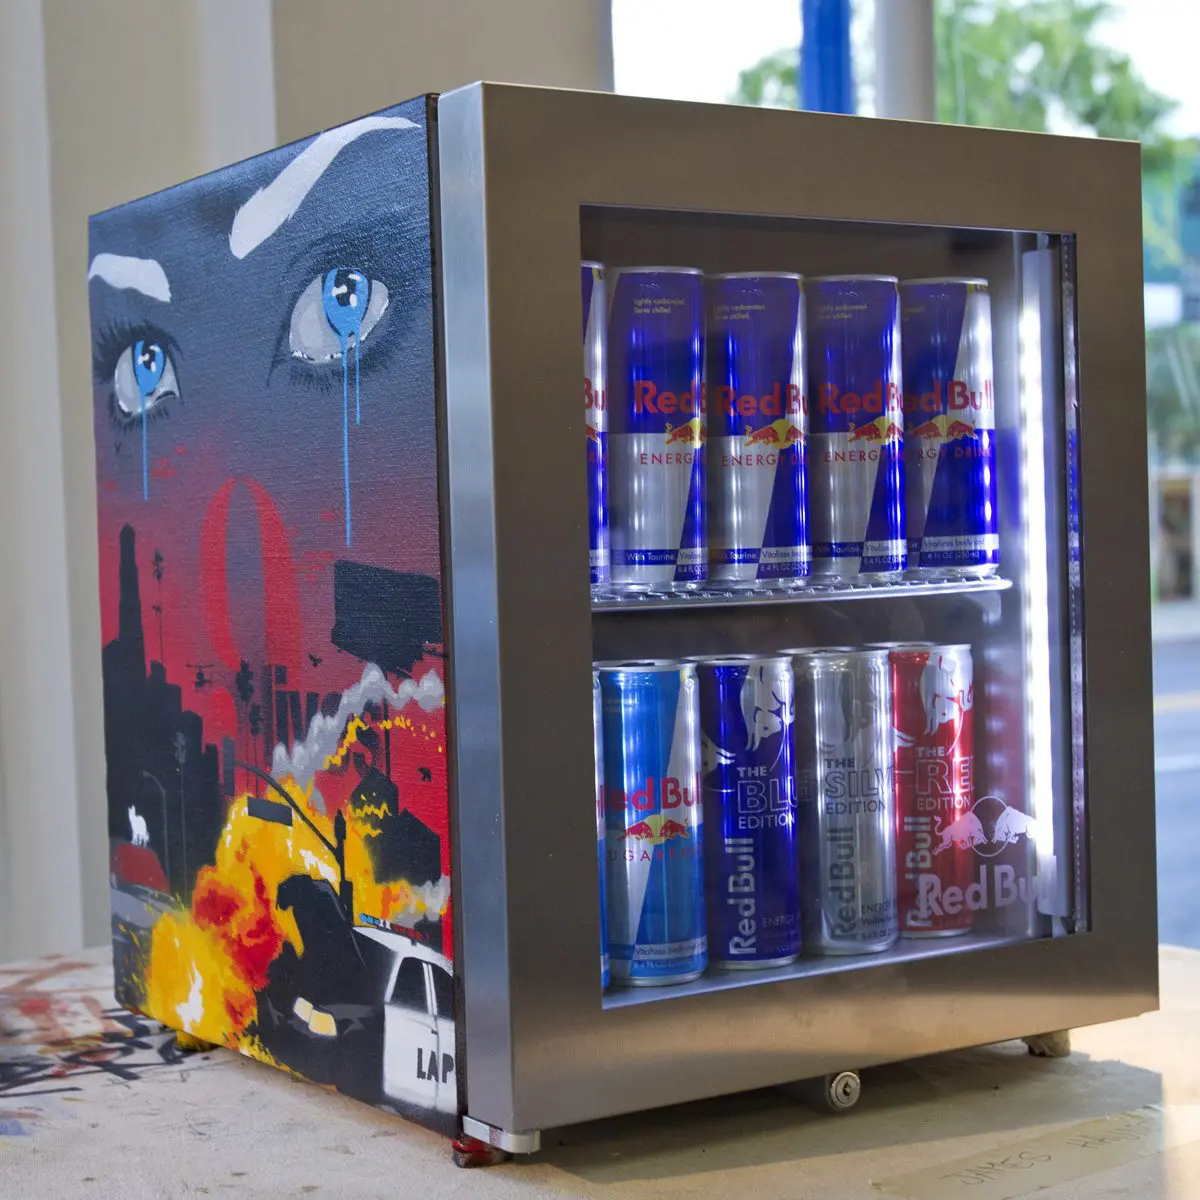 red bull electric cooler